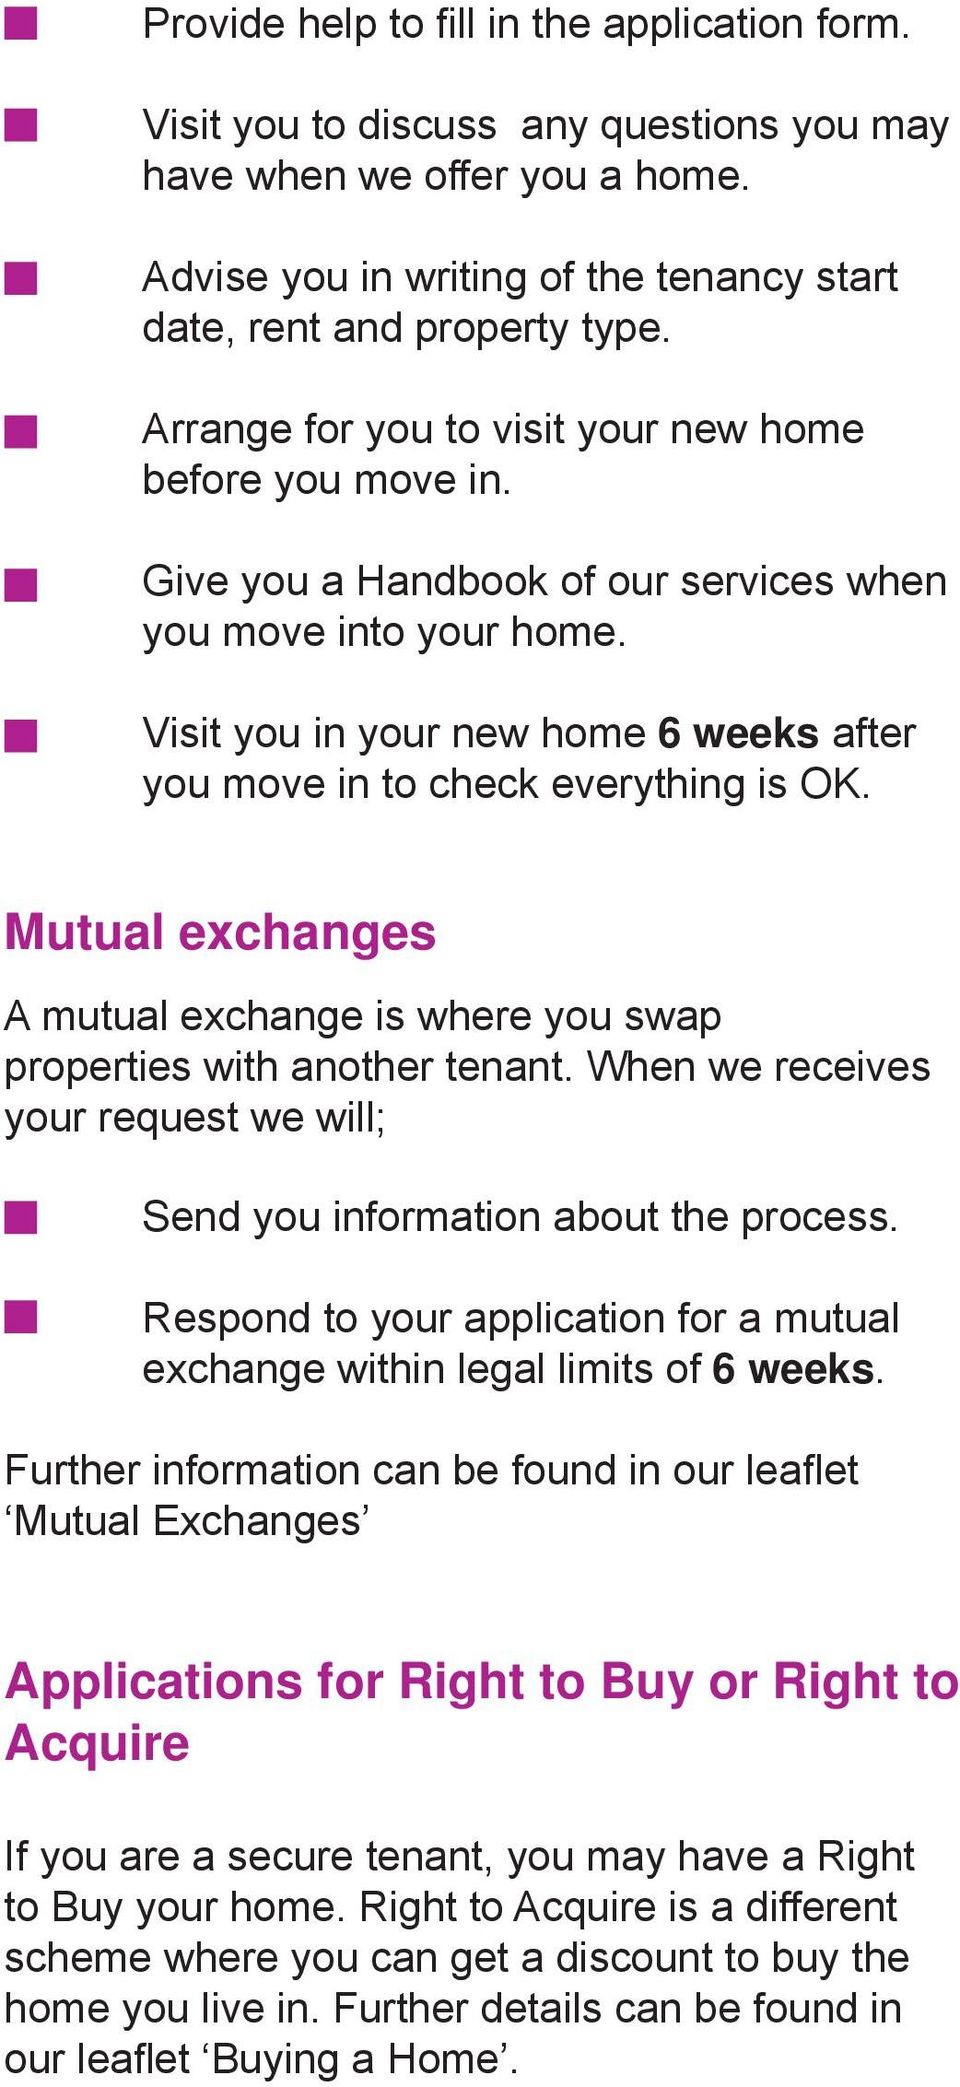 Visit you in your new home 6 weeks after you move in to check everything is OK. Mutual exchanges A mutual exchange is where you swap properties with another tenant.